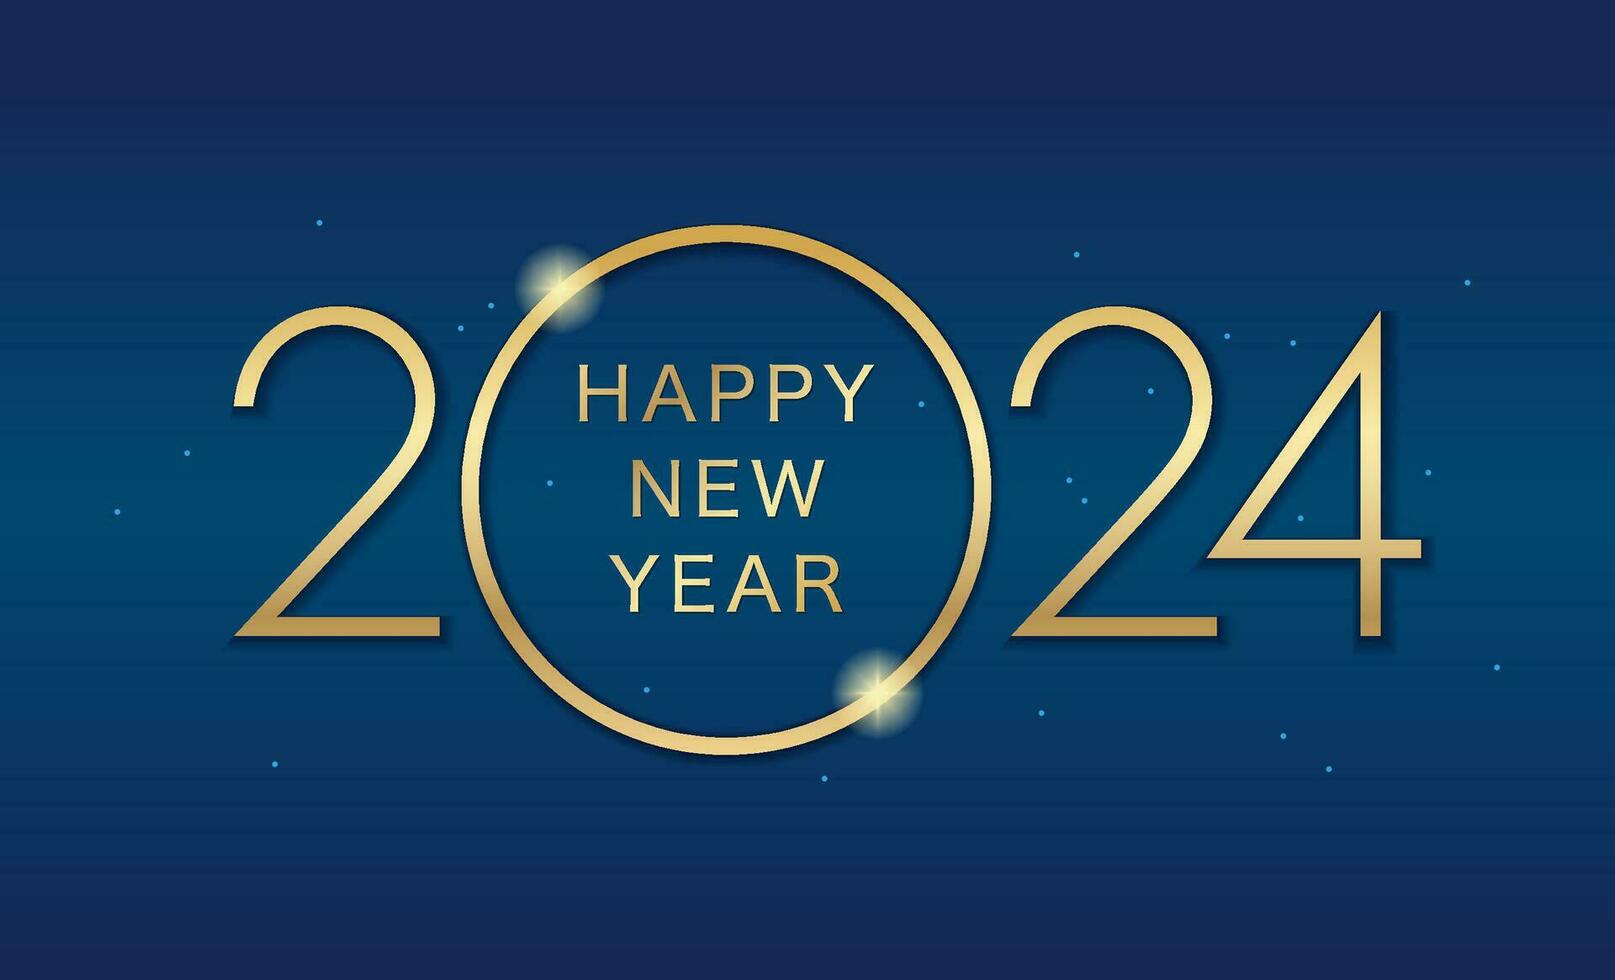 The Year 2024 Vector Gold Logo Illustration With Dark Blue Background.